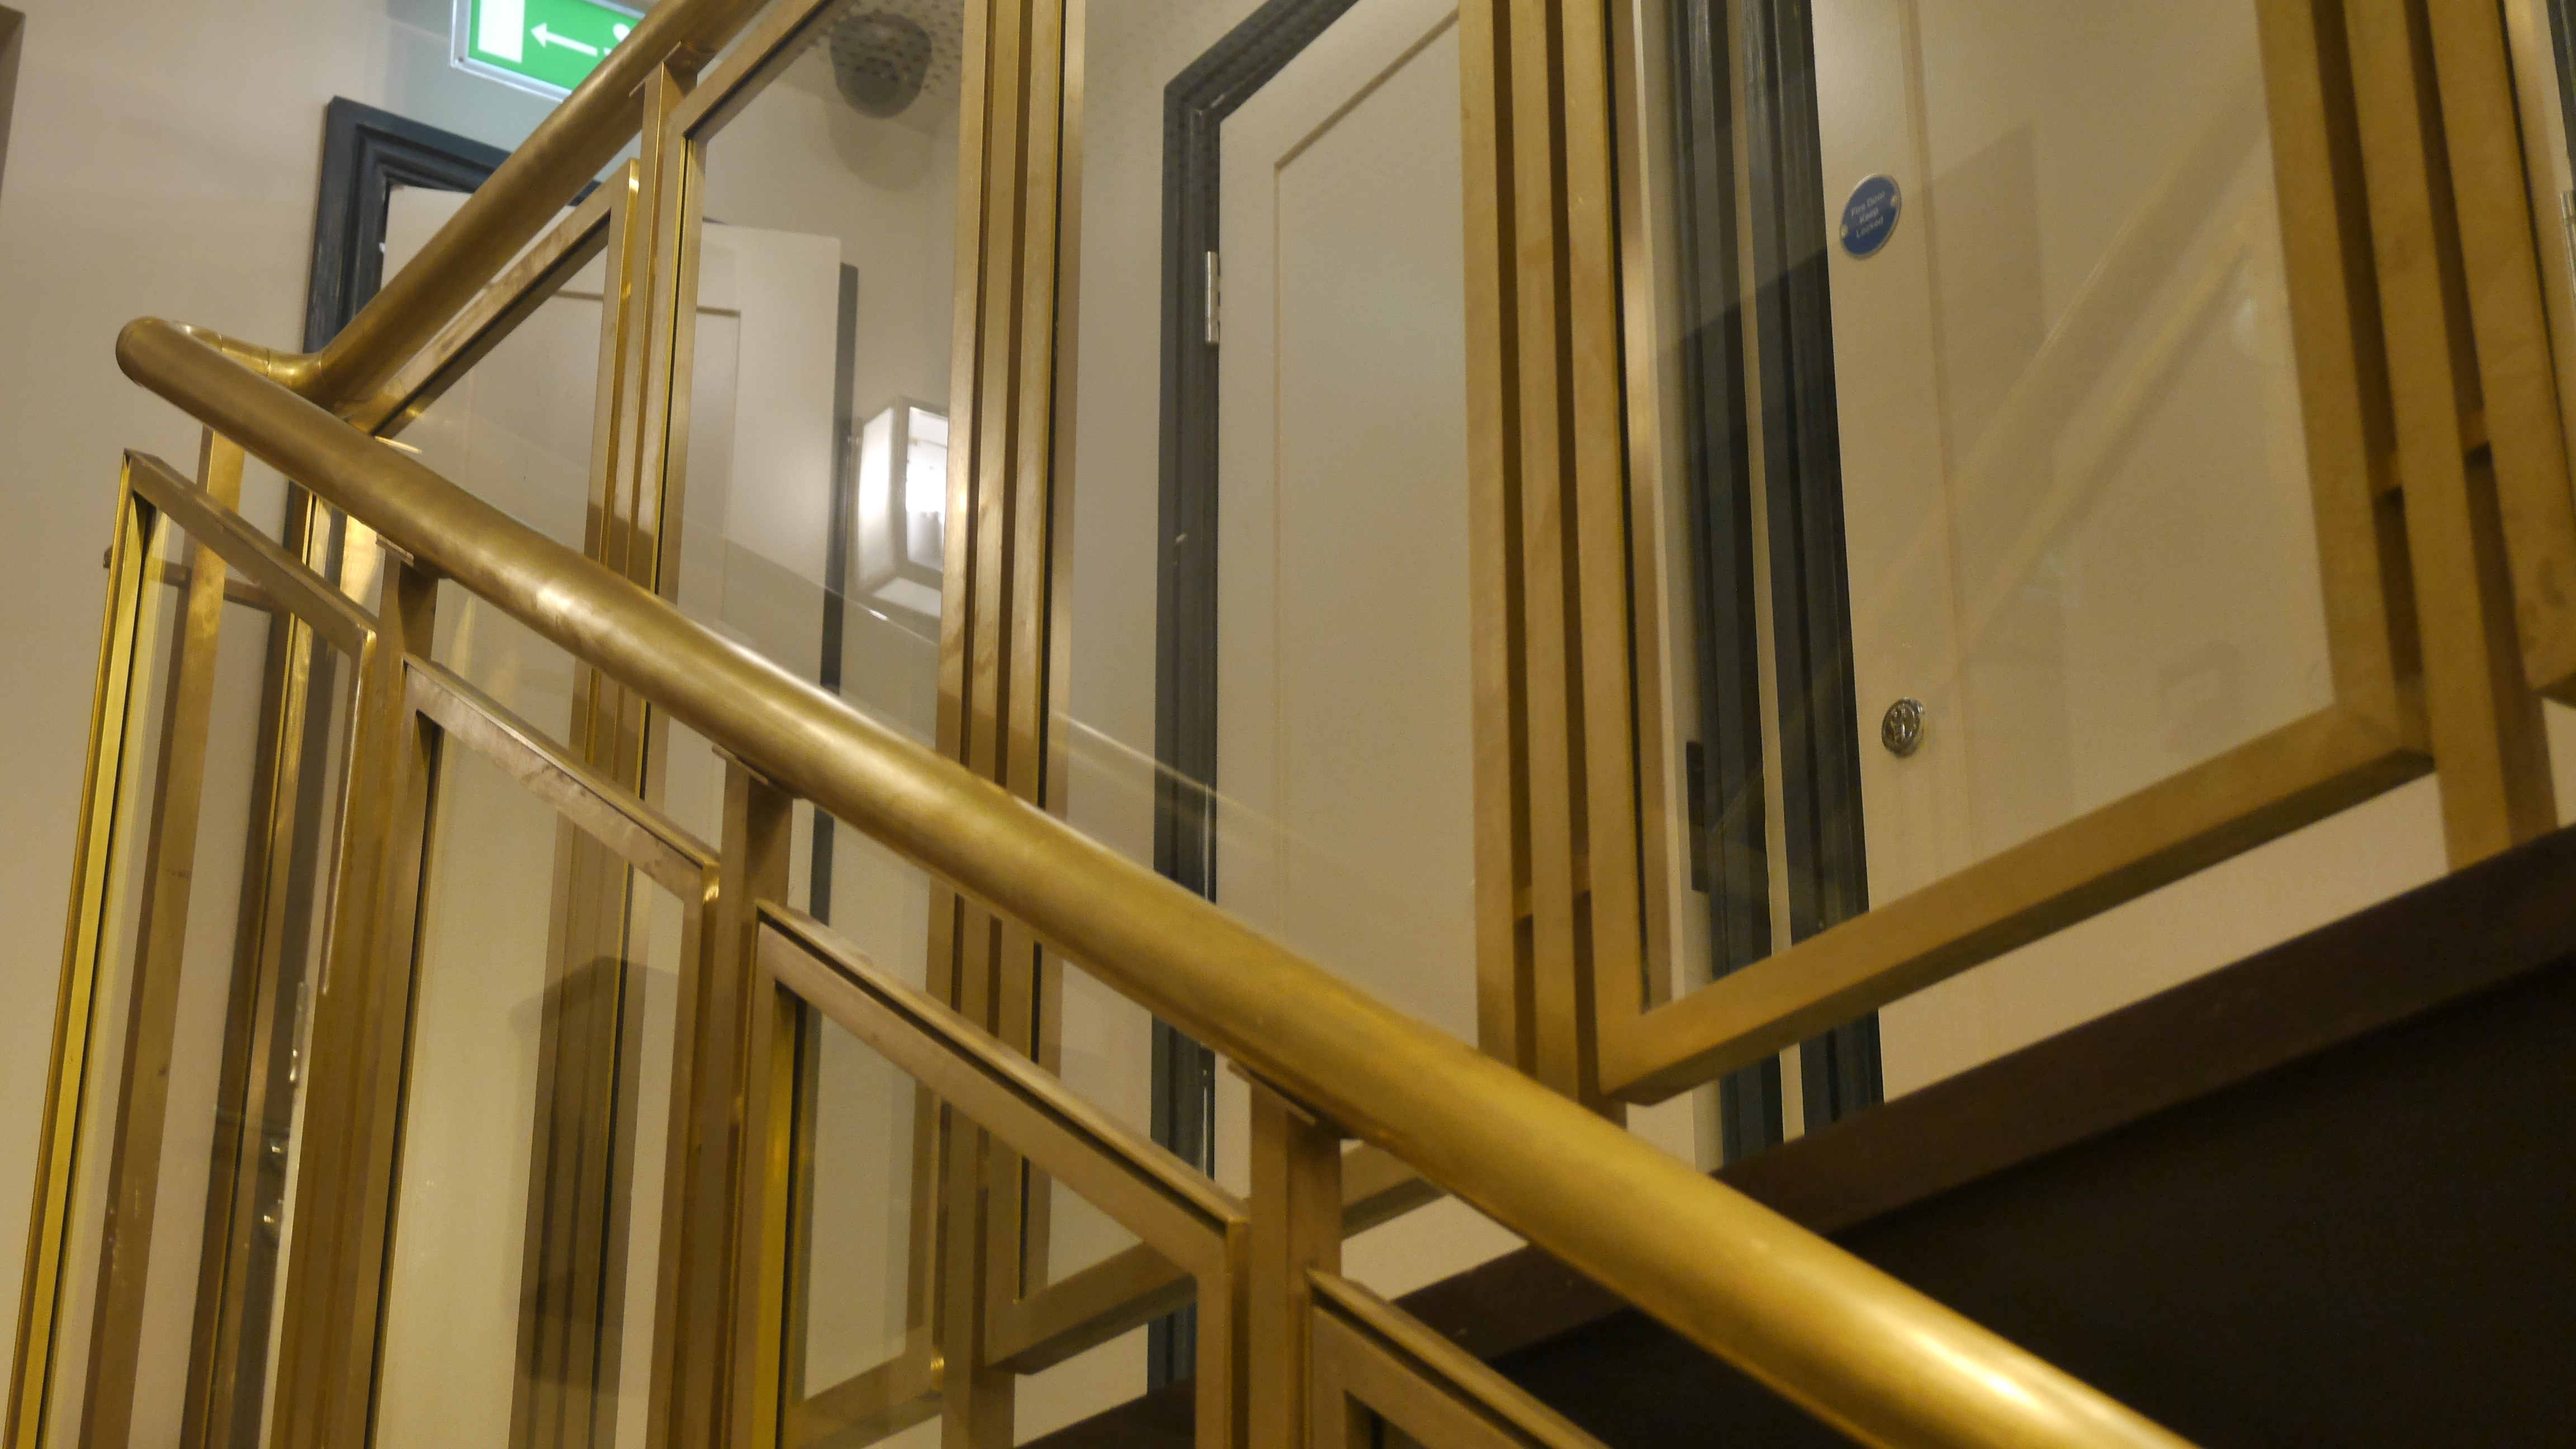 Bespoke Steel and Brass Staircase balustrade for residential properties in London.